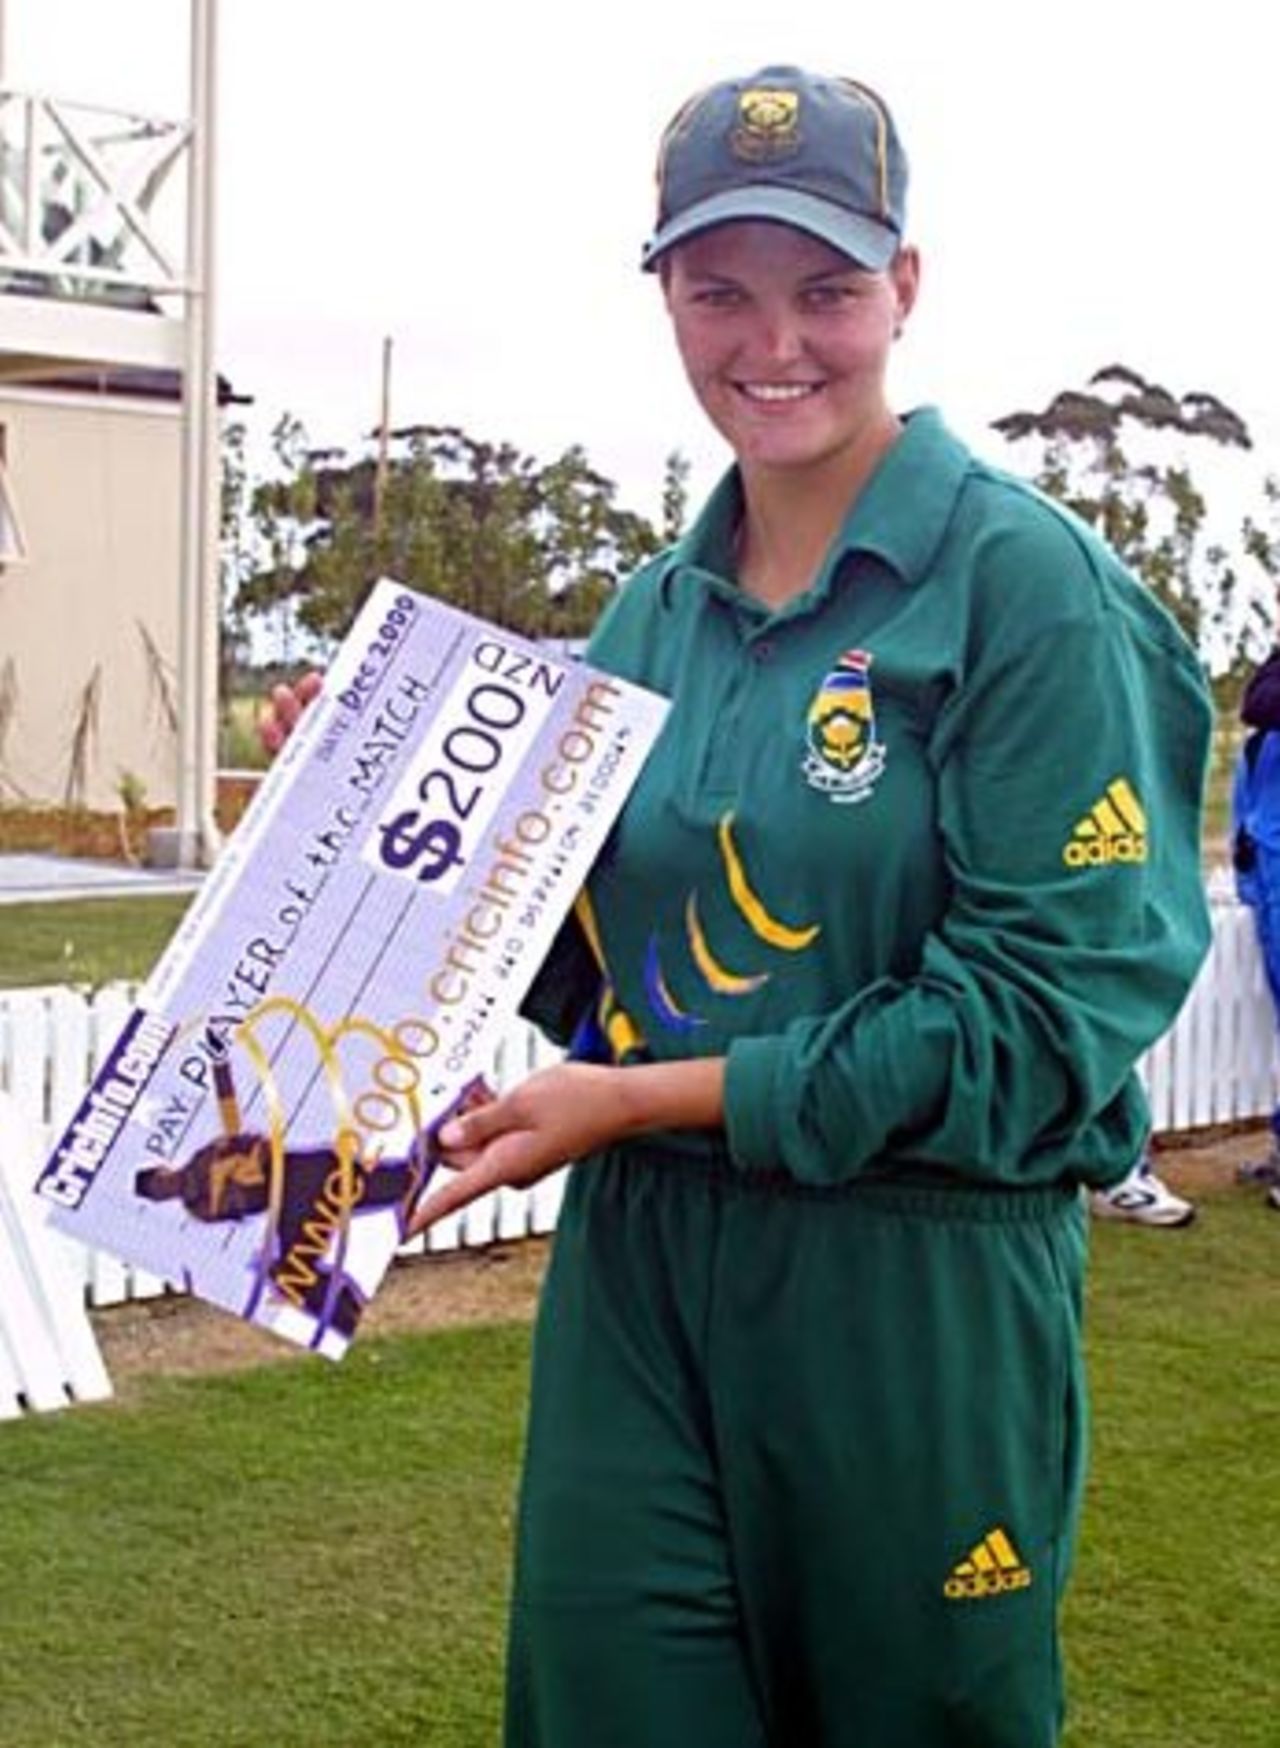 2 Dec 2000: England v South Africa, CricInfo Women's World Cup 2000 played at Lincoln (BIL Oval)